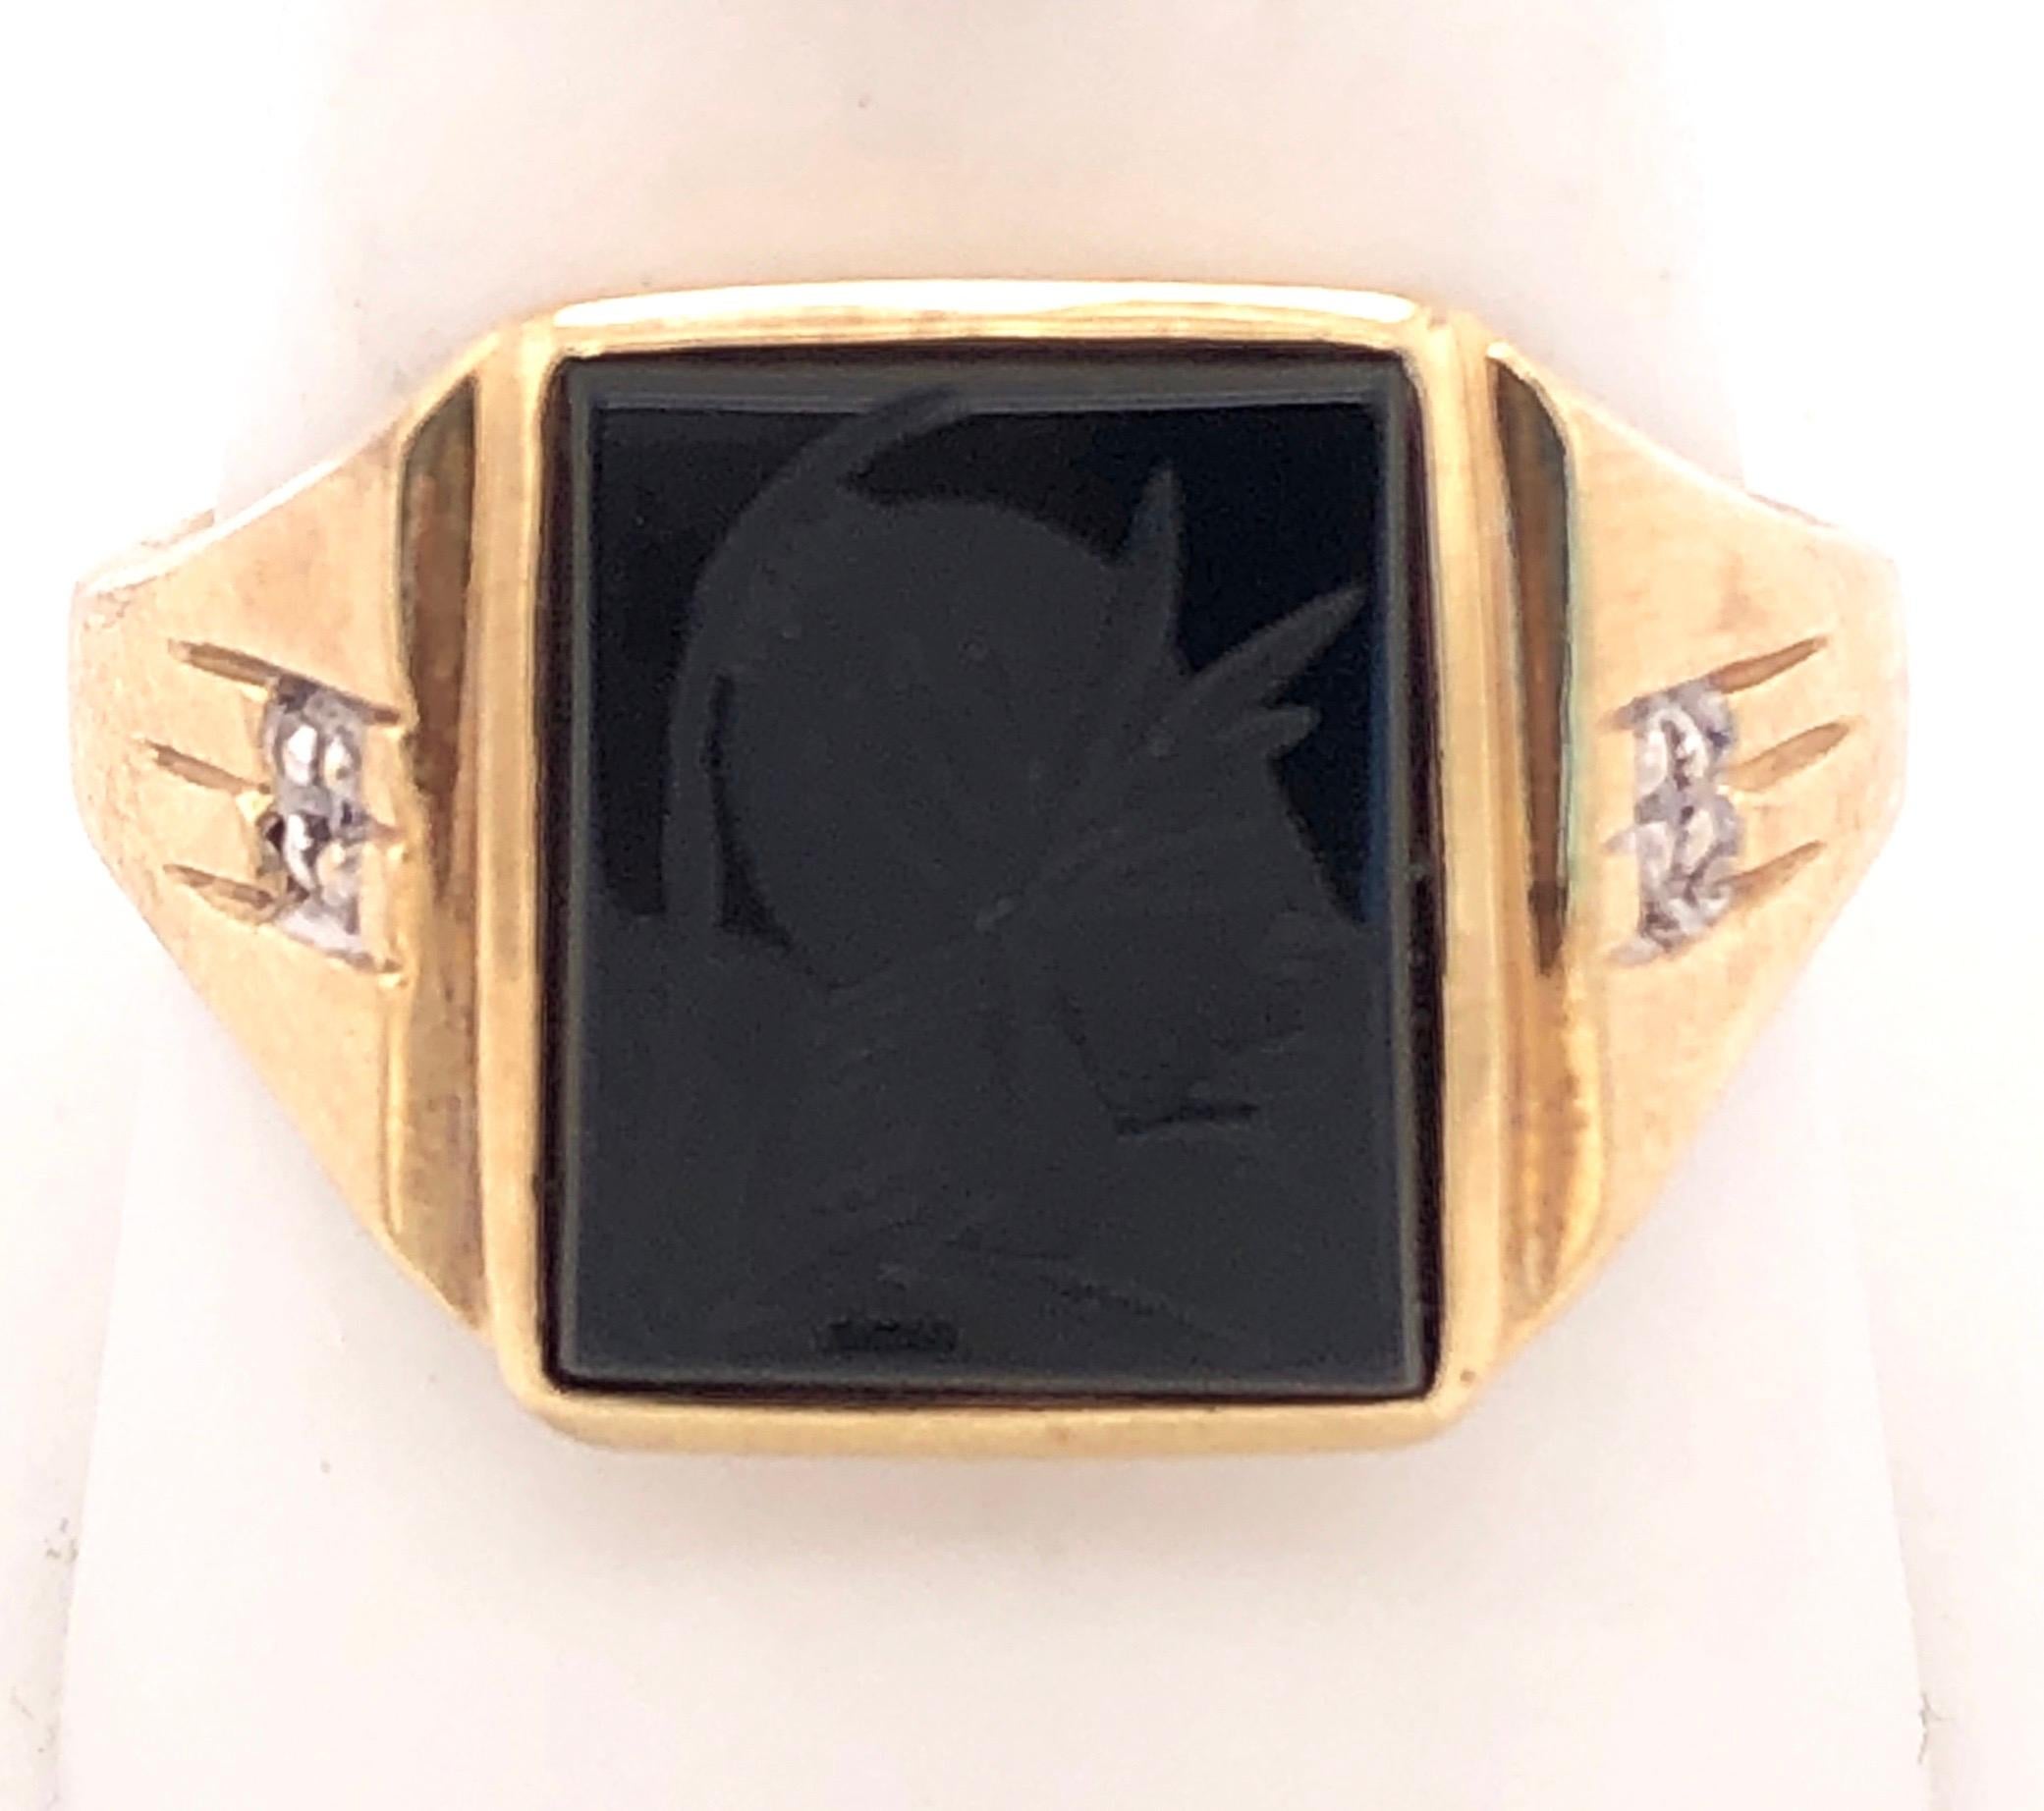 14Kt Yellow Gold Contemporary Onyx Square Ring with Diamonds
Size 10.25 with 5.21 grams total weight